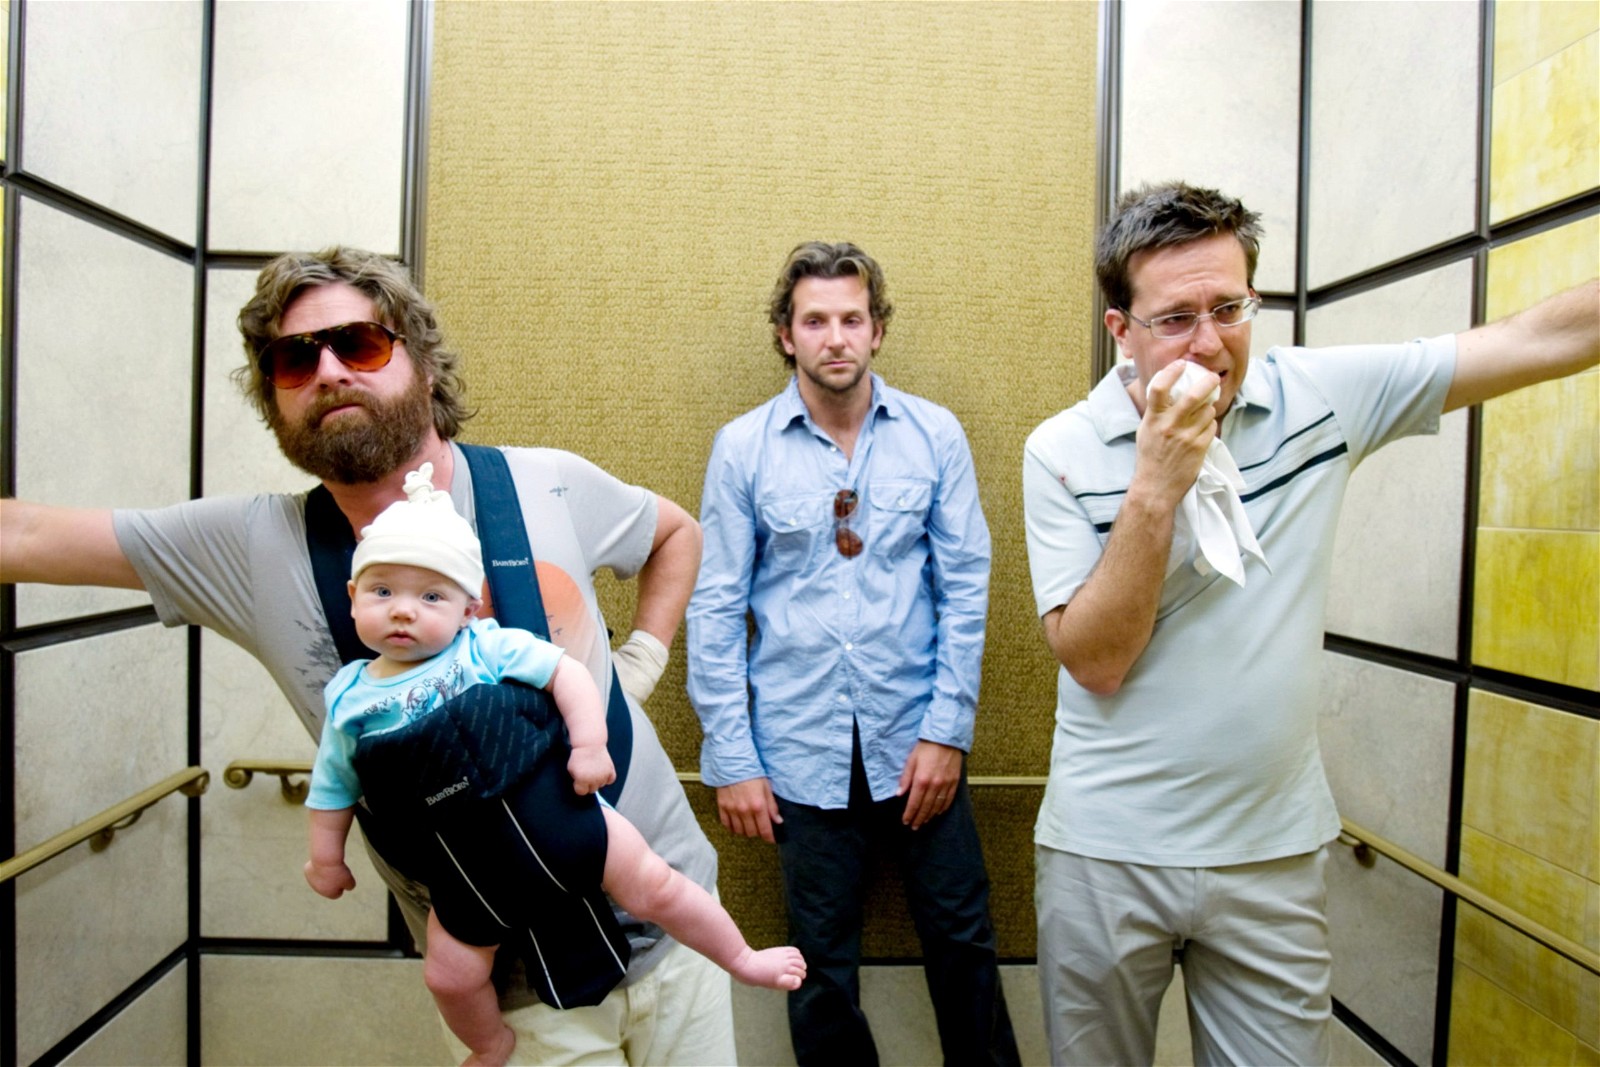 Zach Galifianakis, Bradley Cooper, and Ed Helms in The Hangover (2009)